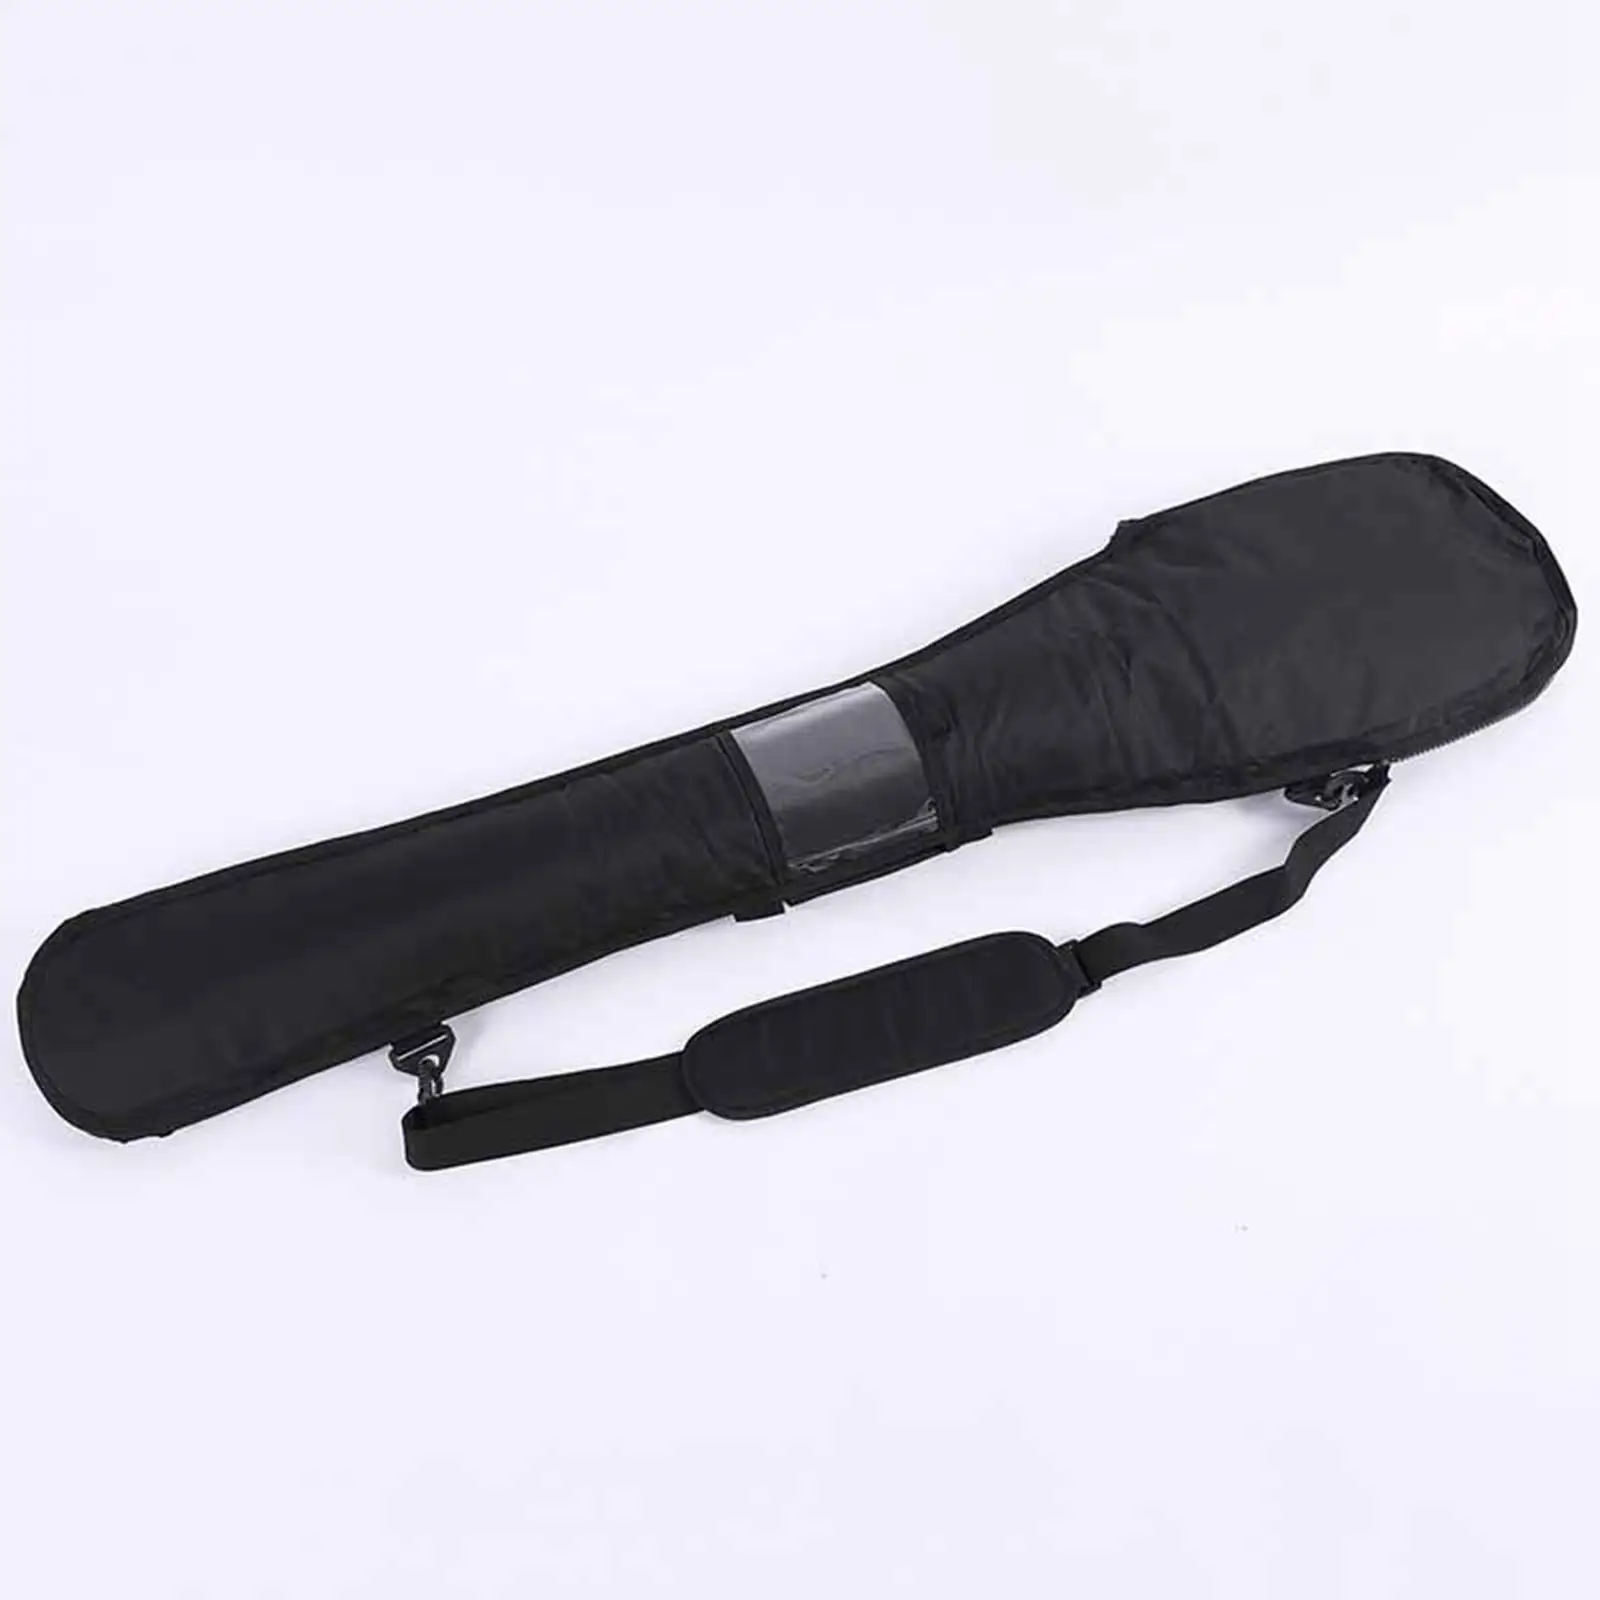 Paddle Pouch Pocket Carrying Board Storage Pouch for Rafting Kayak Stand up Paddle Board